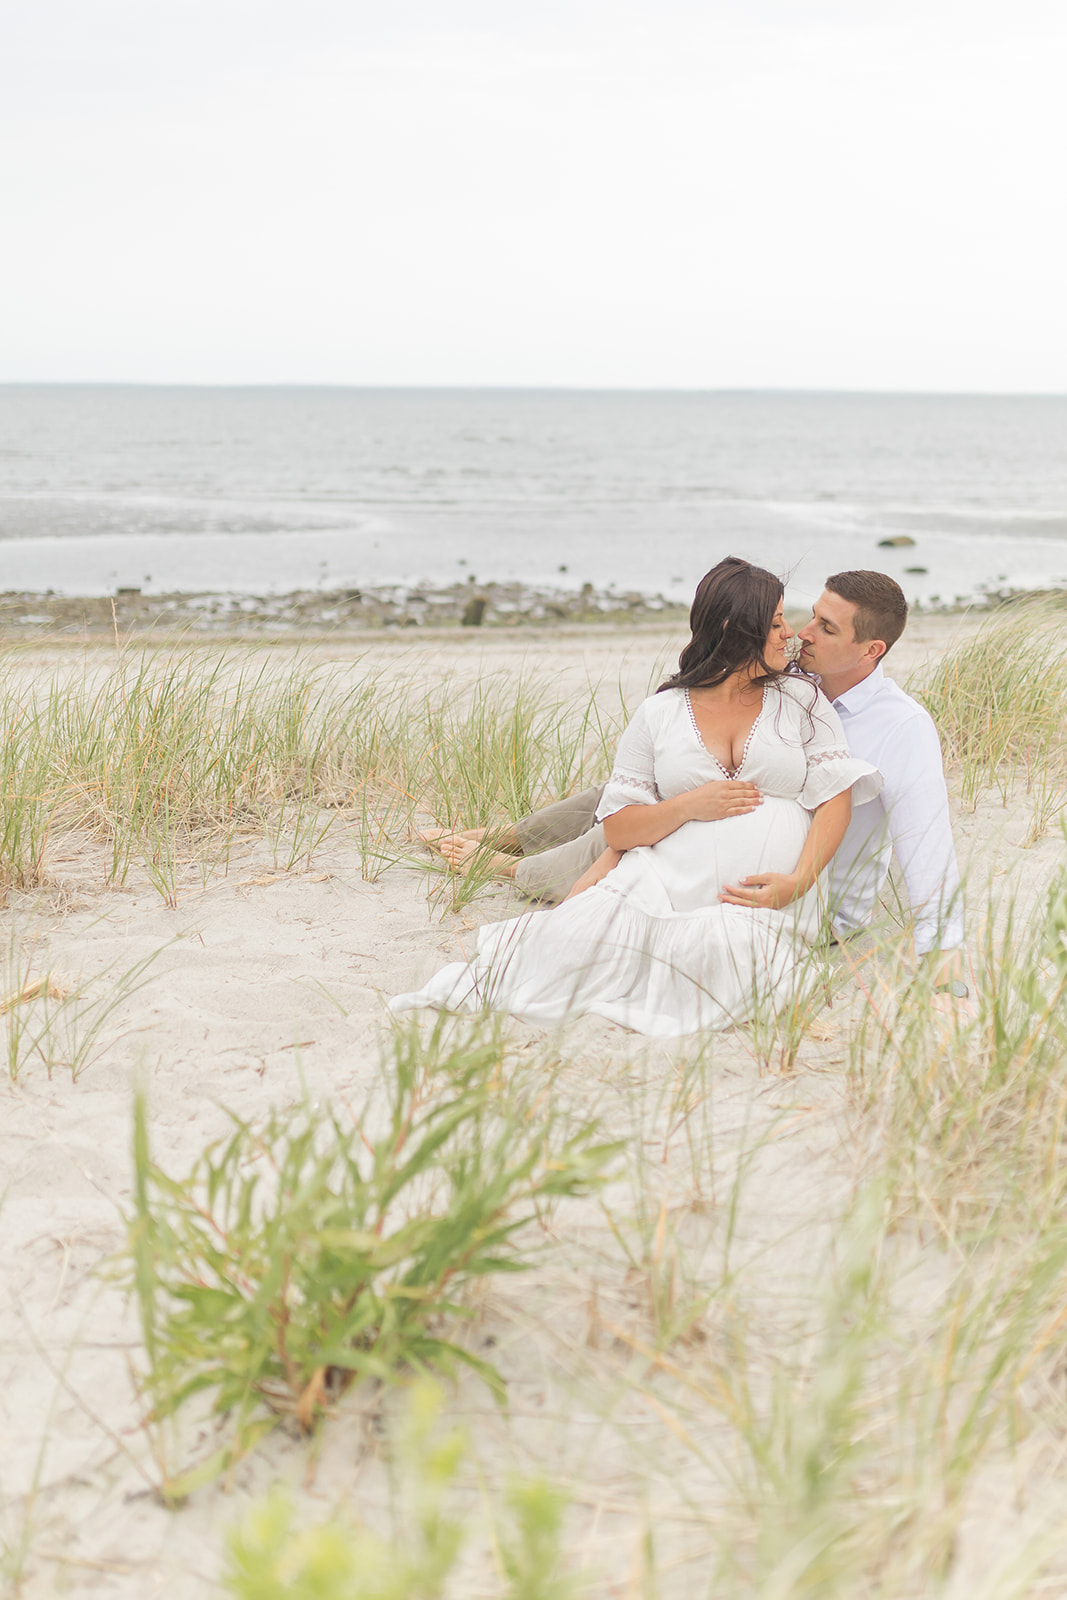 A mom to be sits in the dunes and leans in for a kiss with her husband before visiting Baby Shower Venues Bridgeport CT